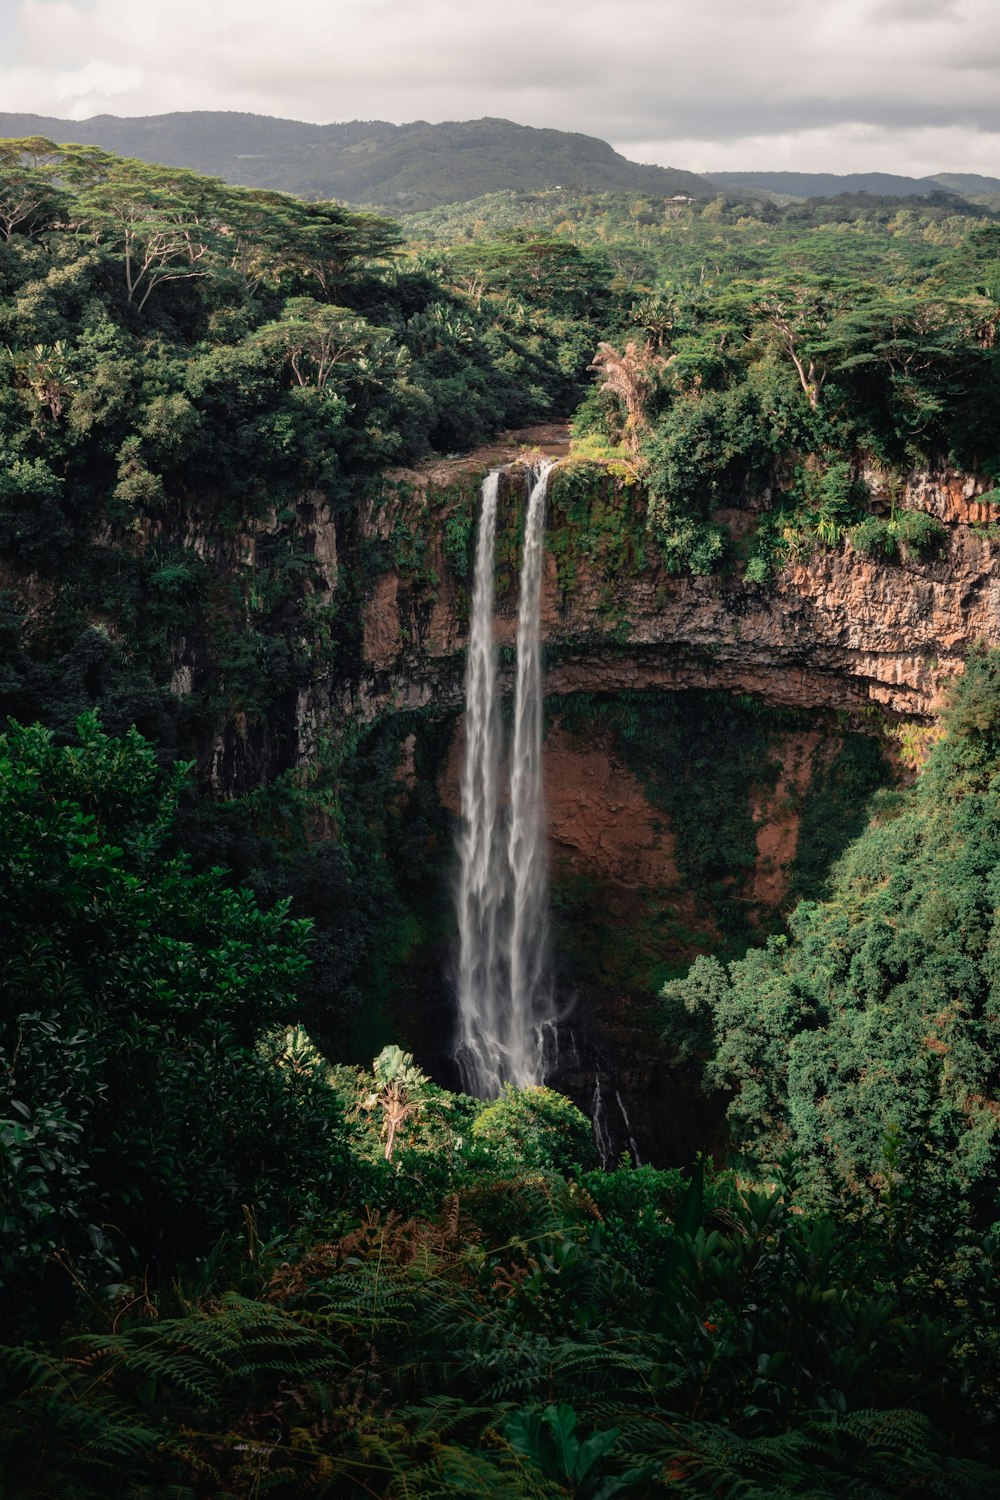 a large waterfall in the middle of a lush green forest